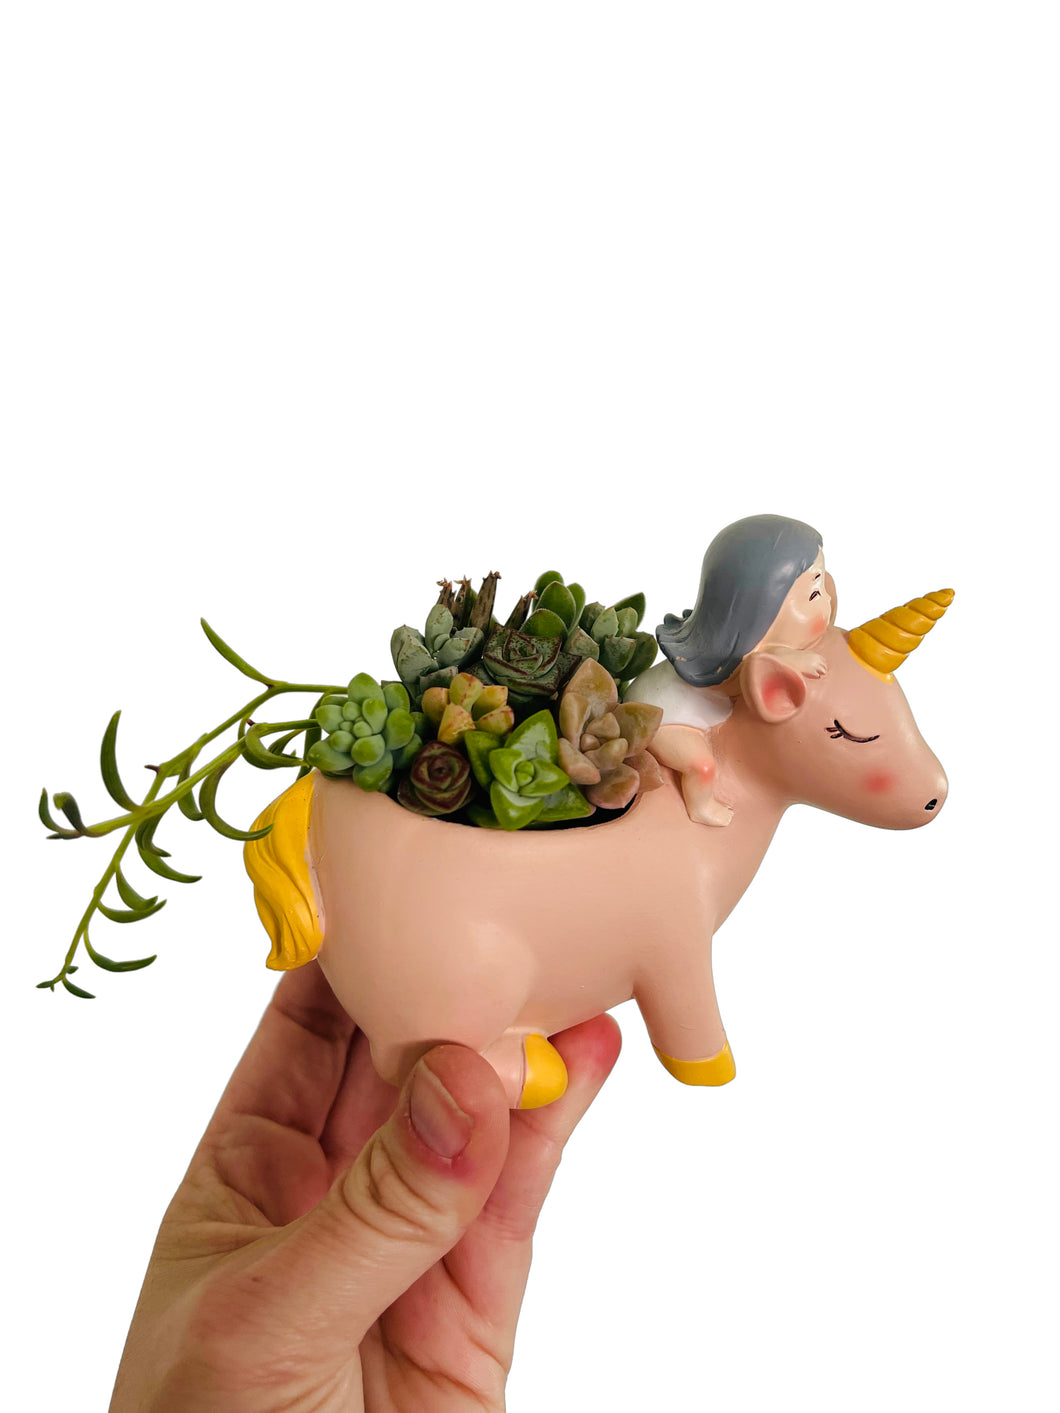 Unicorn planter, Comes With A Assortment of Succulent Cuttings to Make Your Own Planter